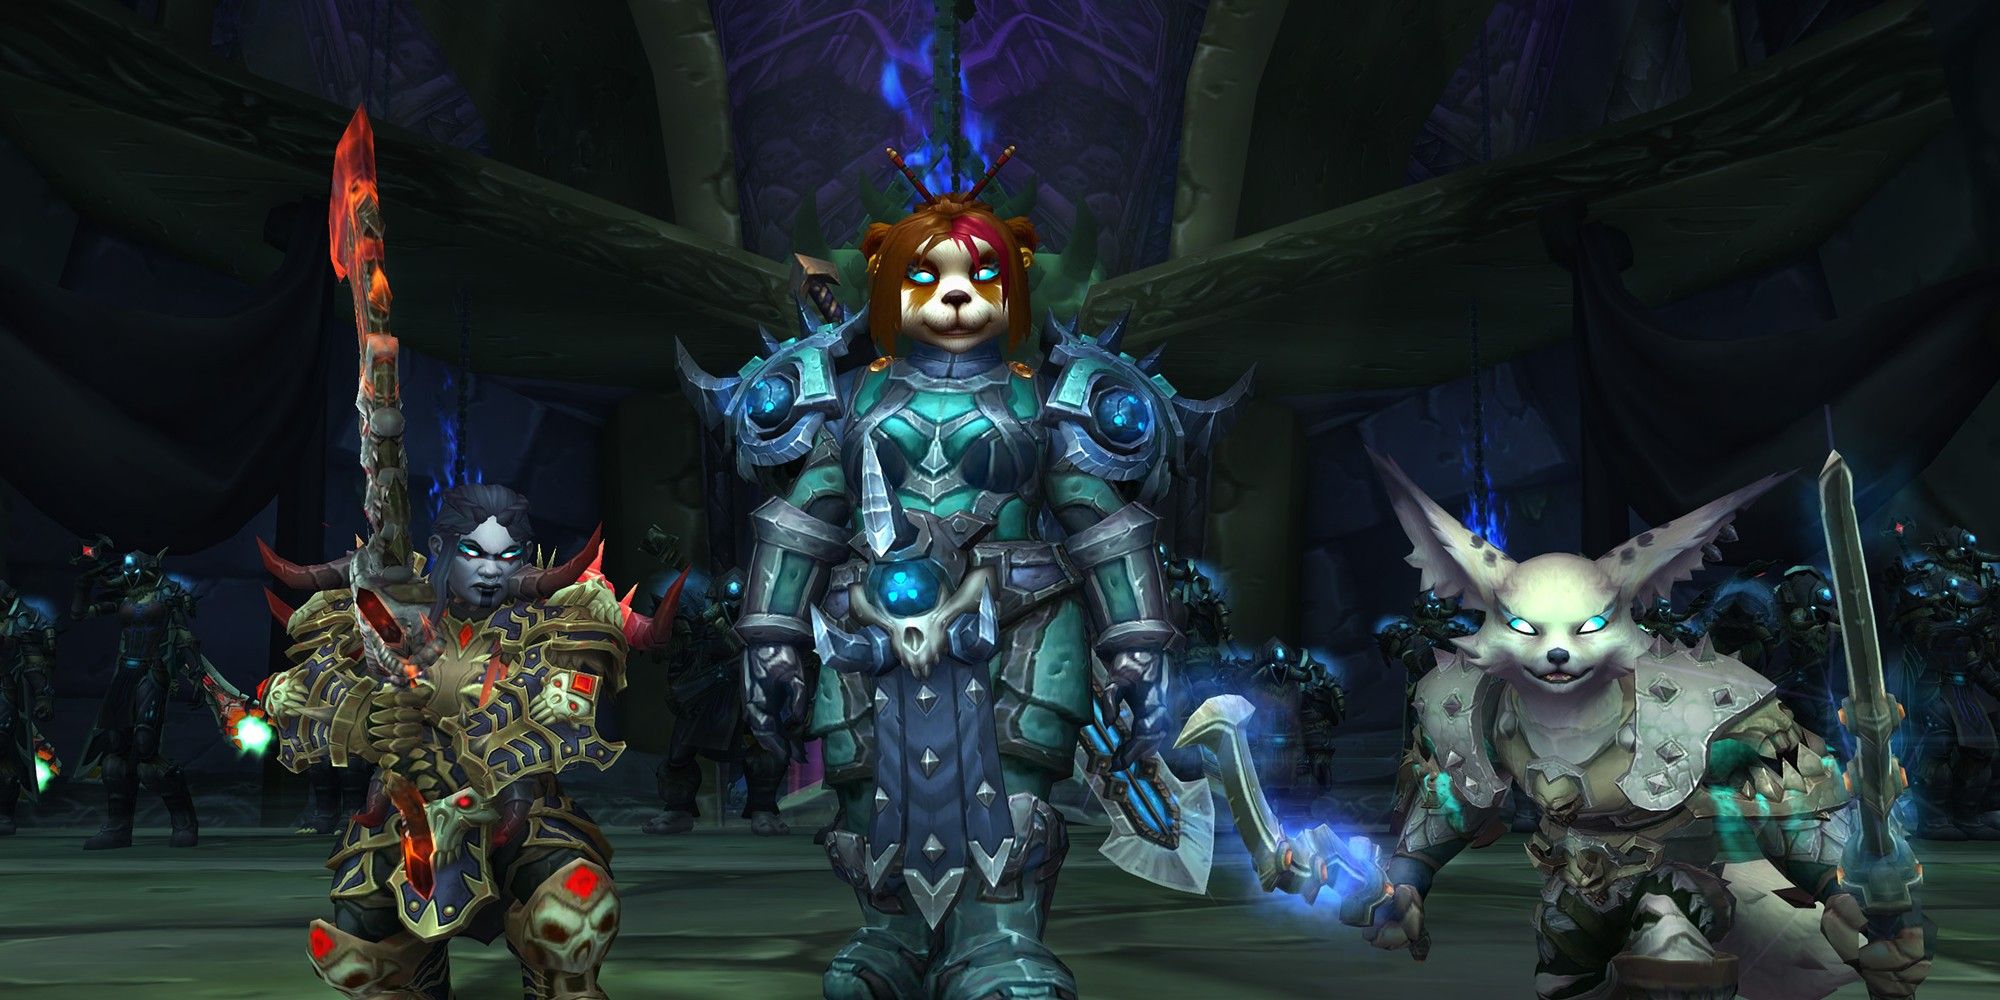 A group of Death Knight characters in World of Warcraft